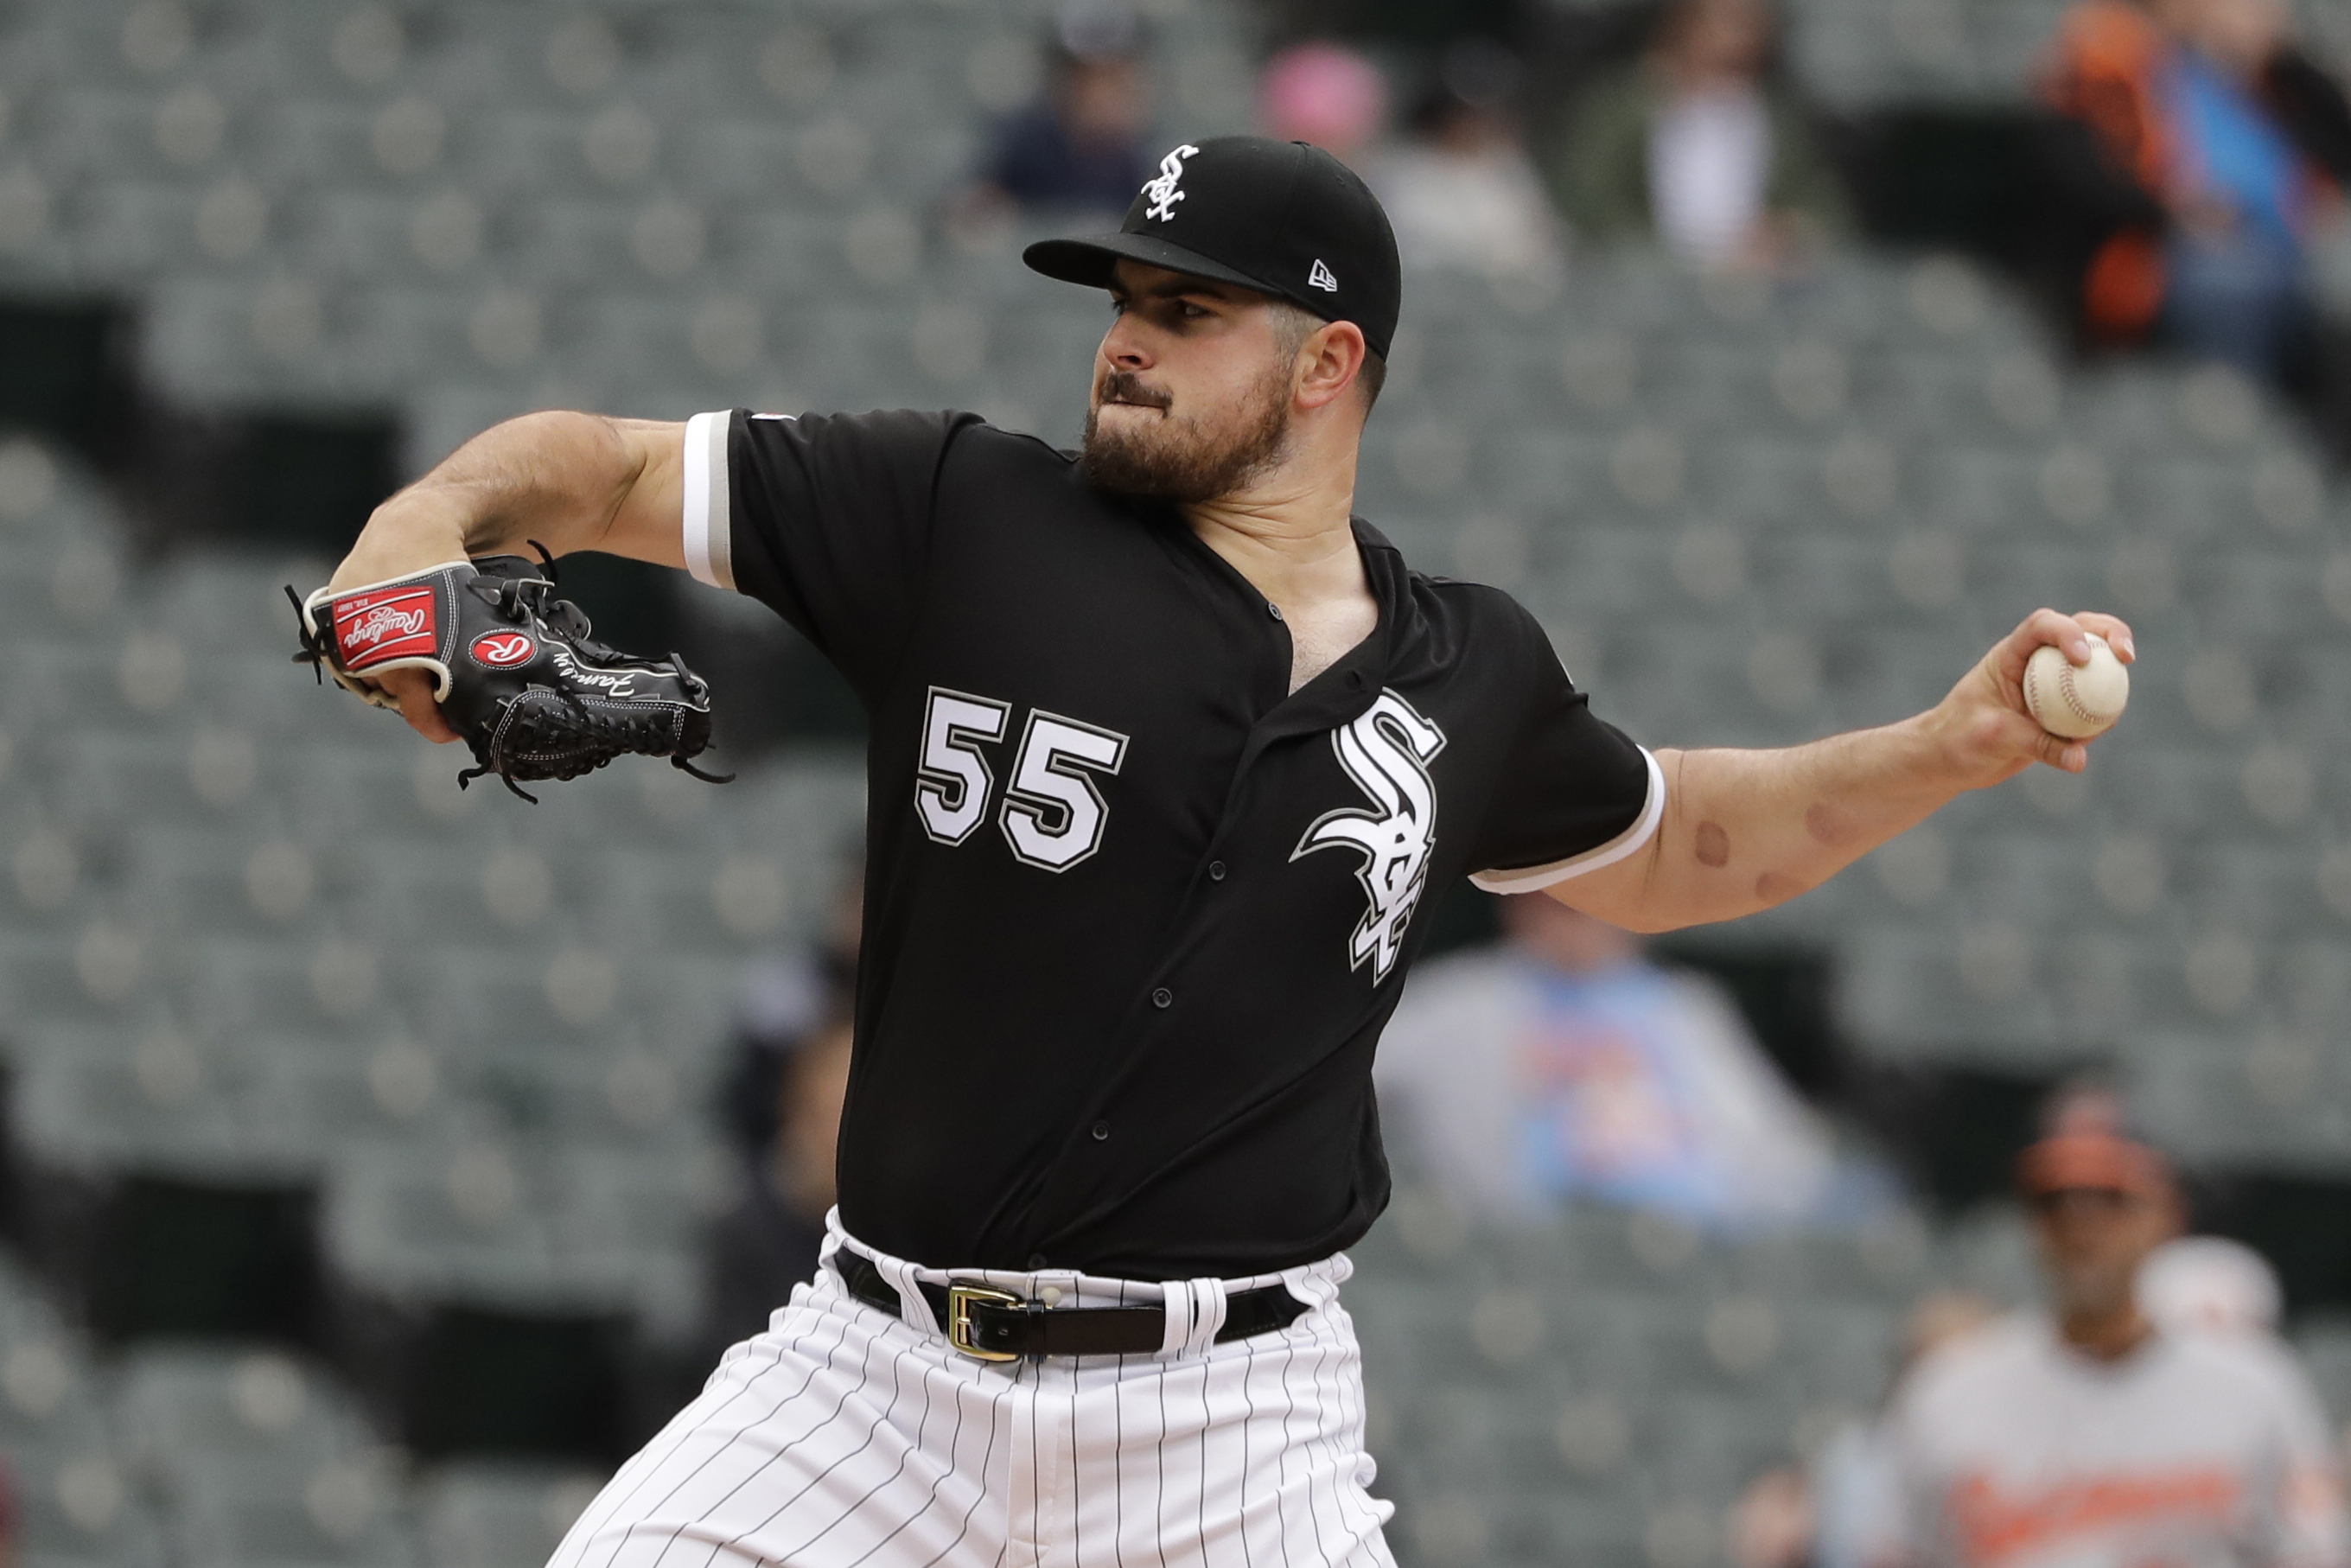 Tommy John surgery 'is on the table' for White Sox pitcher Carlos Rodon  after tests reveal swelling in his elbow: 'It's not a positive